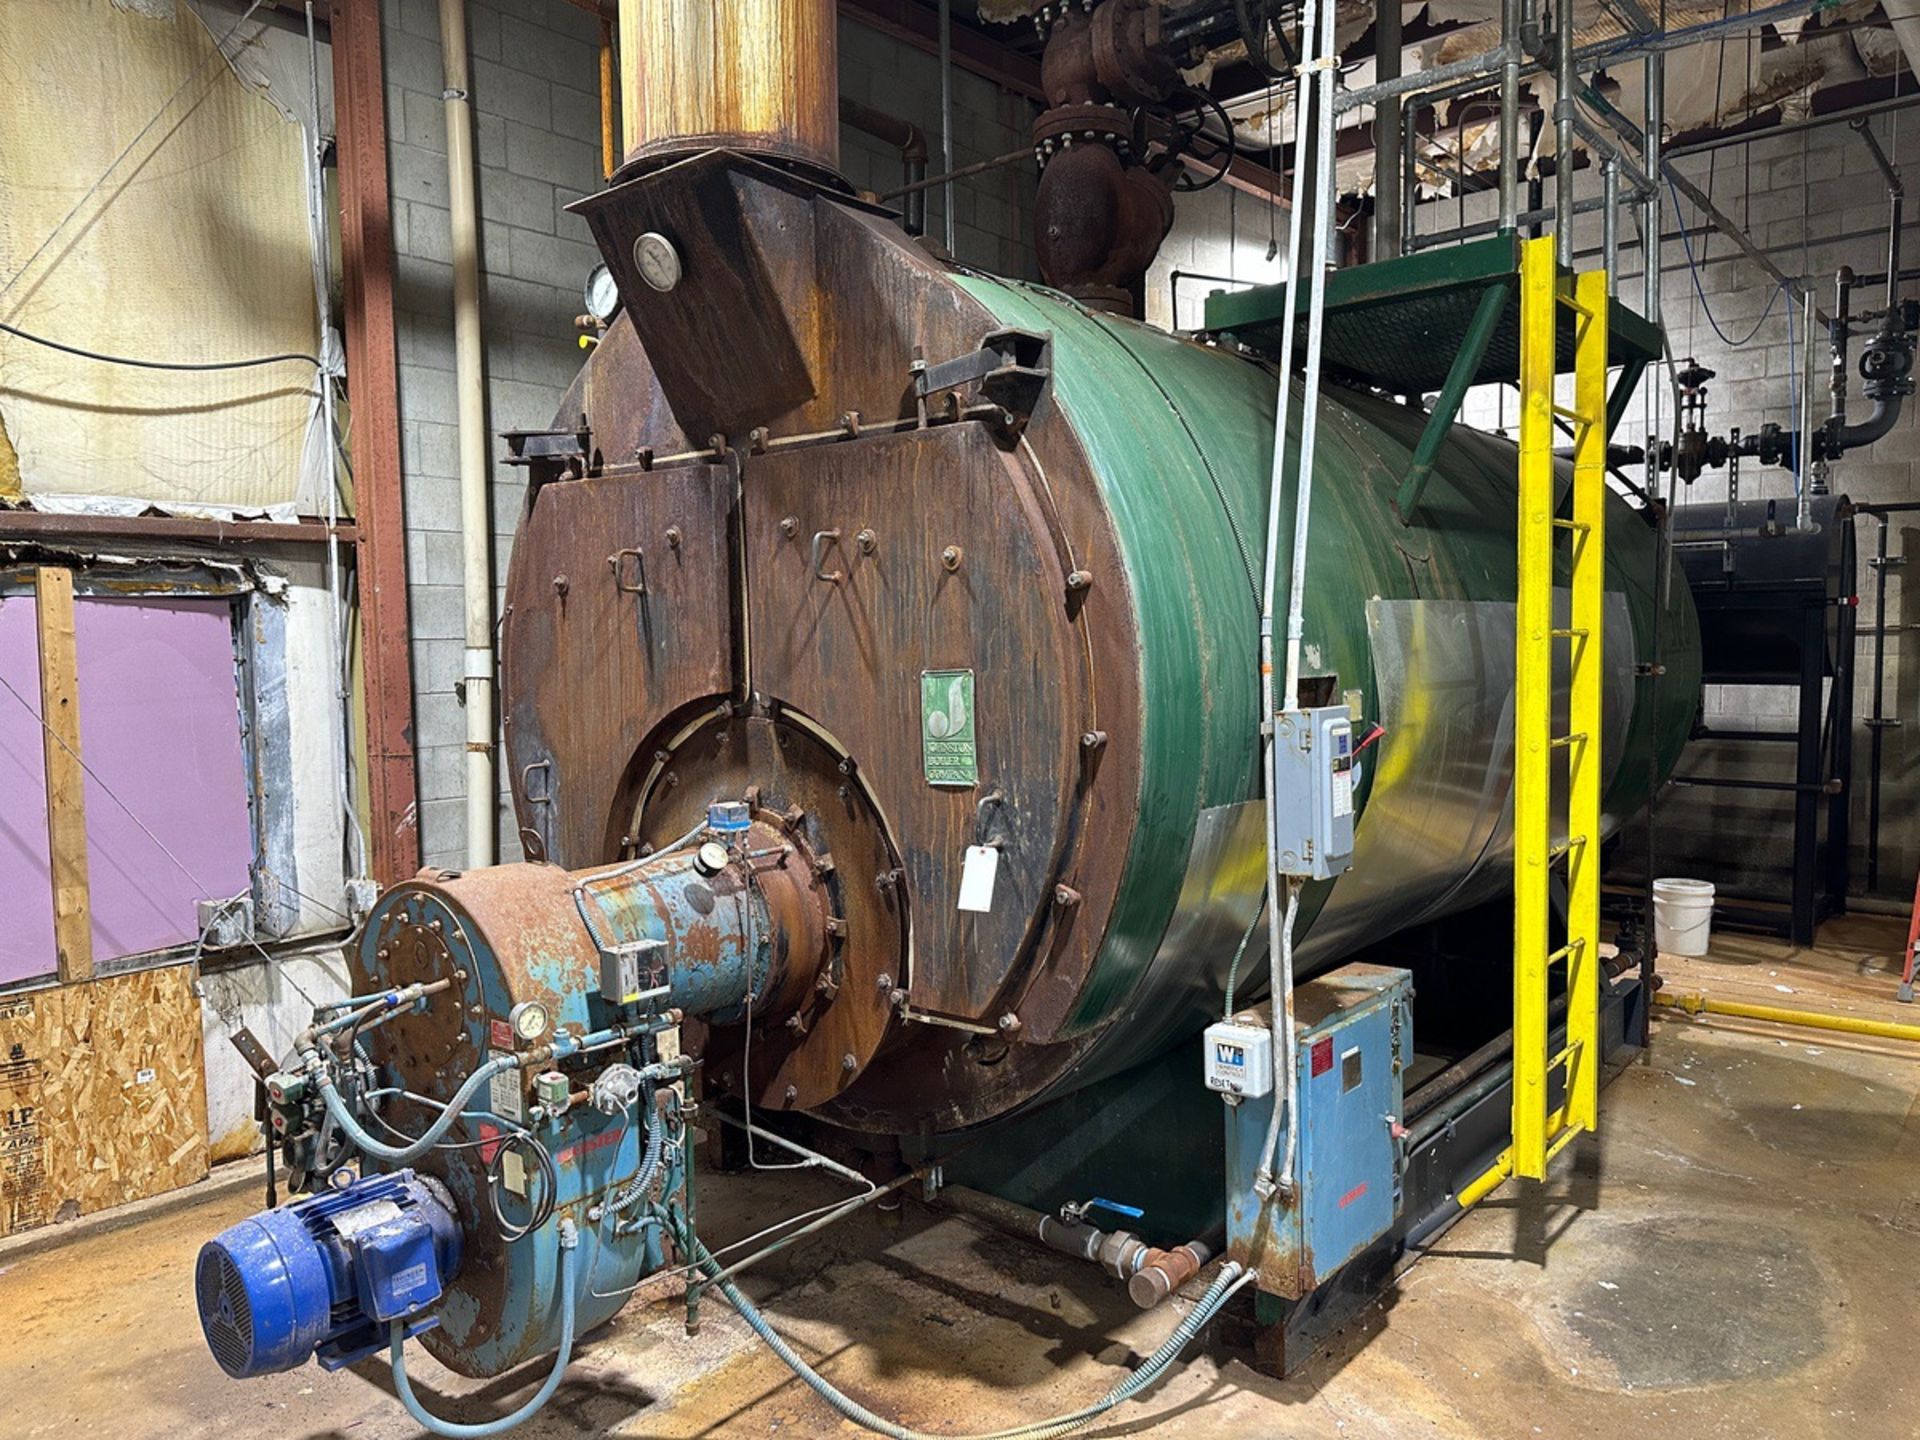 300 HP Johnston Boiler with Webster HD Series Heater currently in good w | Rig Fee $3000